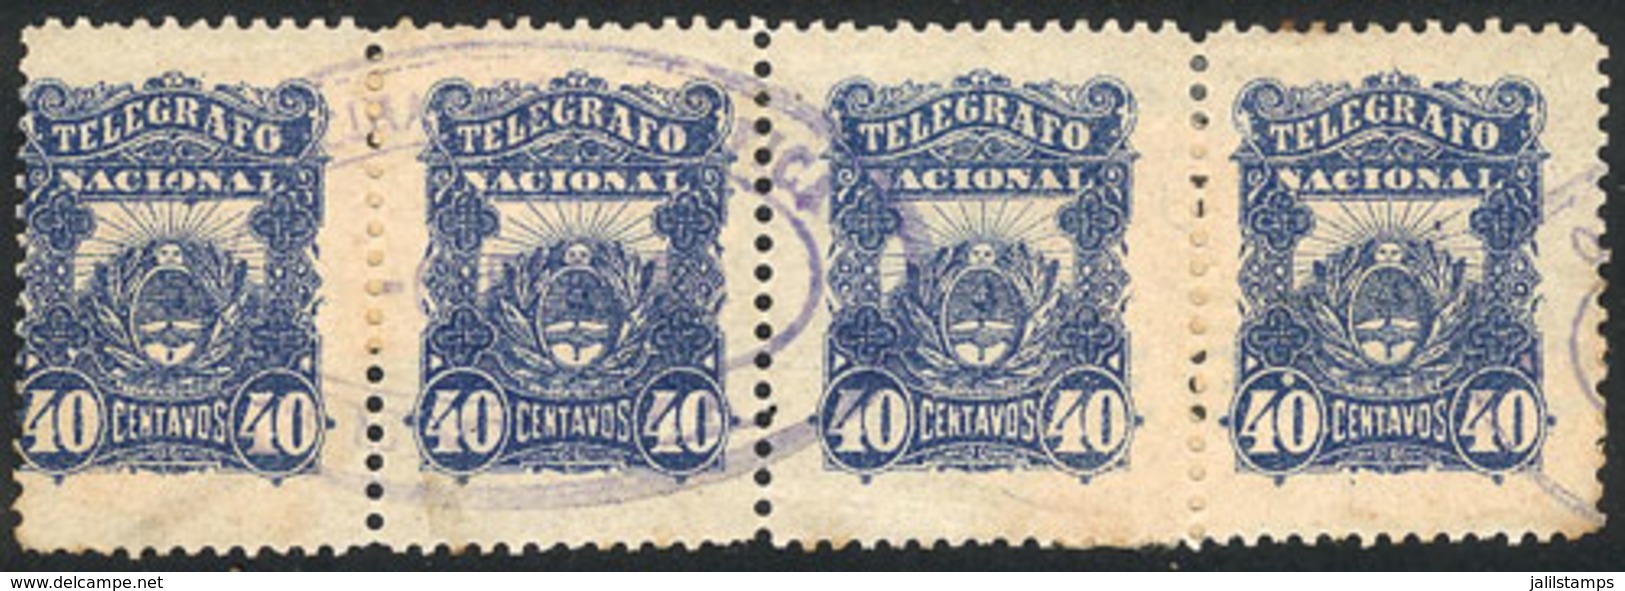 ARGENTINA: GJ.4, Beautiful Used Strip Of 4 Stamps, VF Quality, Rare Multiple! - Telegraafzegels